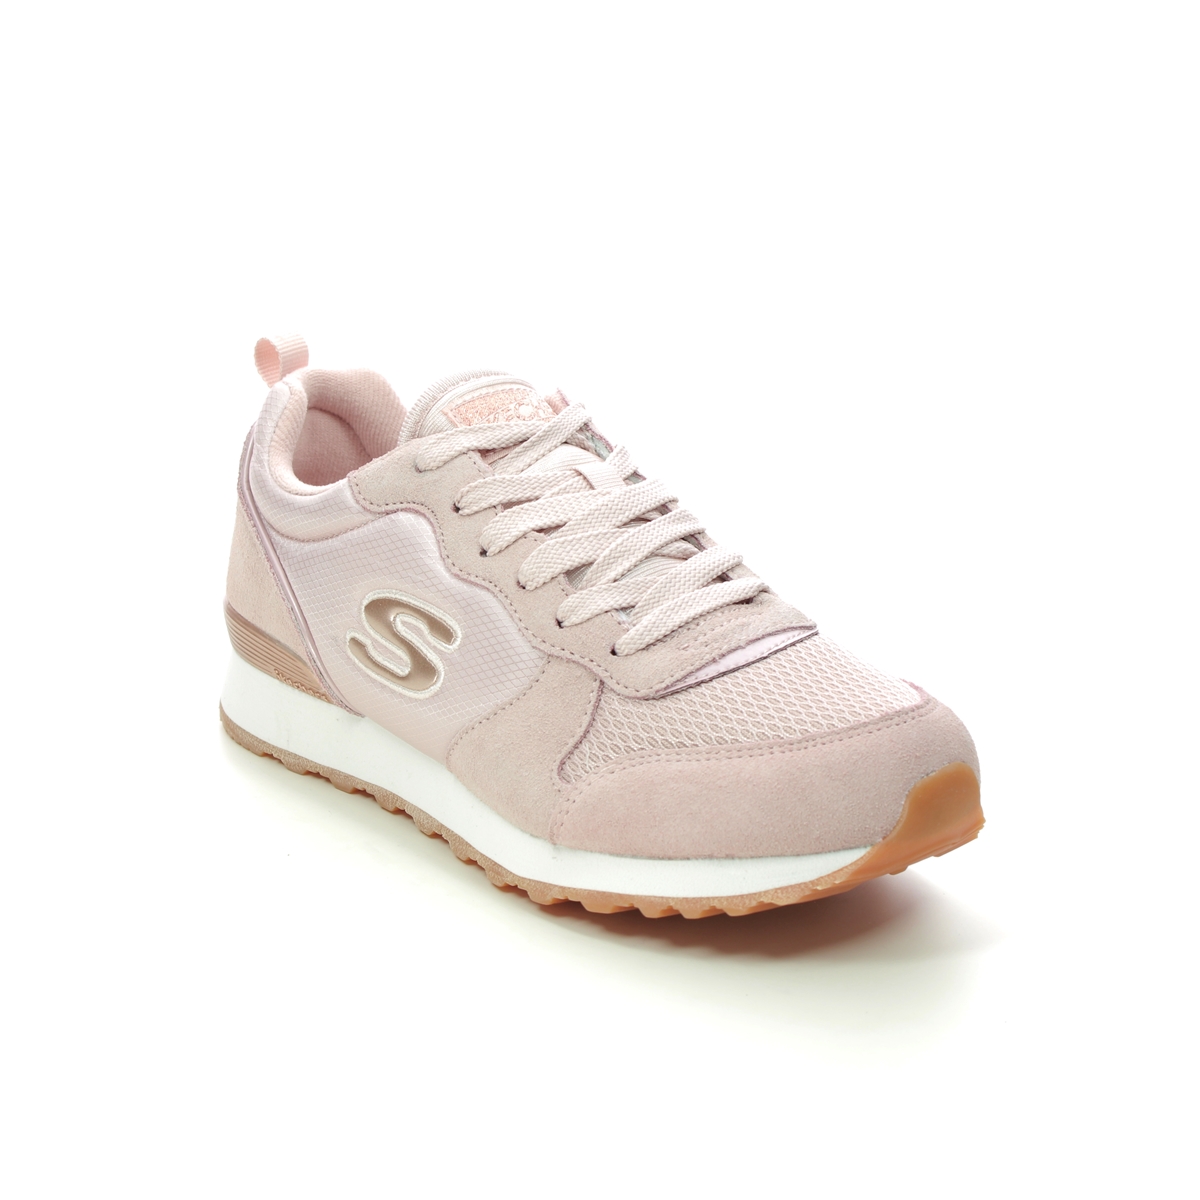 Skechers 85 Gold Gurl 111 Blush Pink trainers